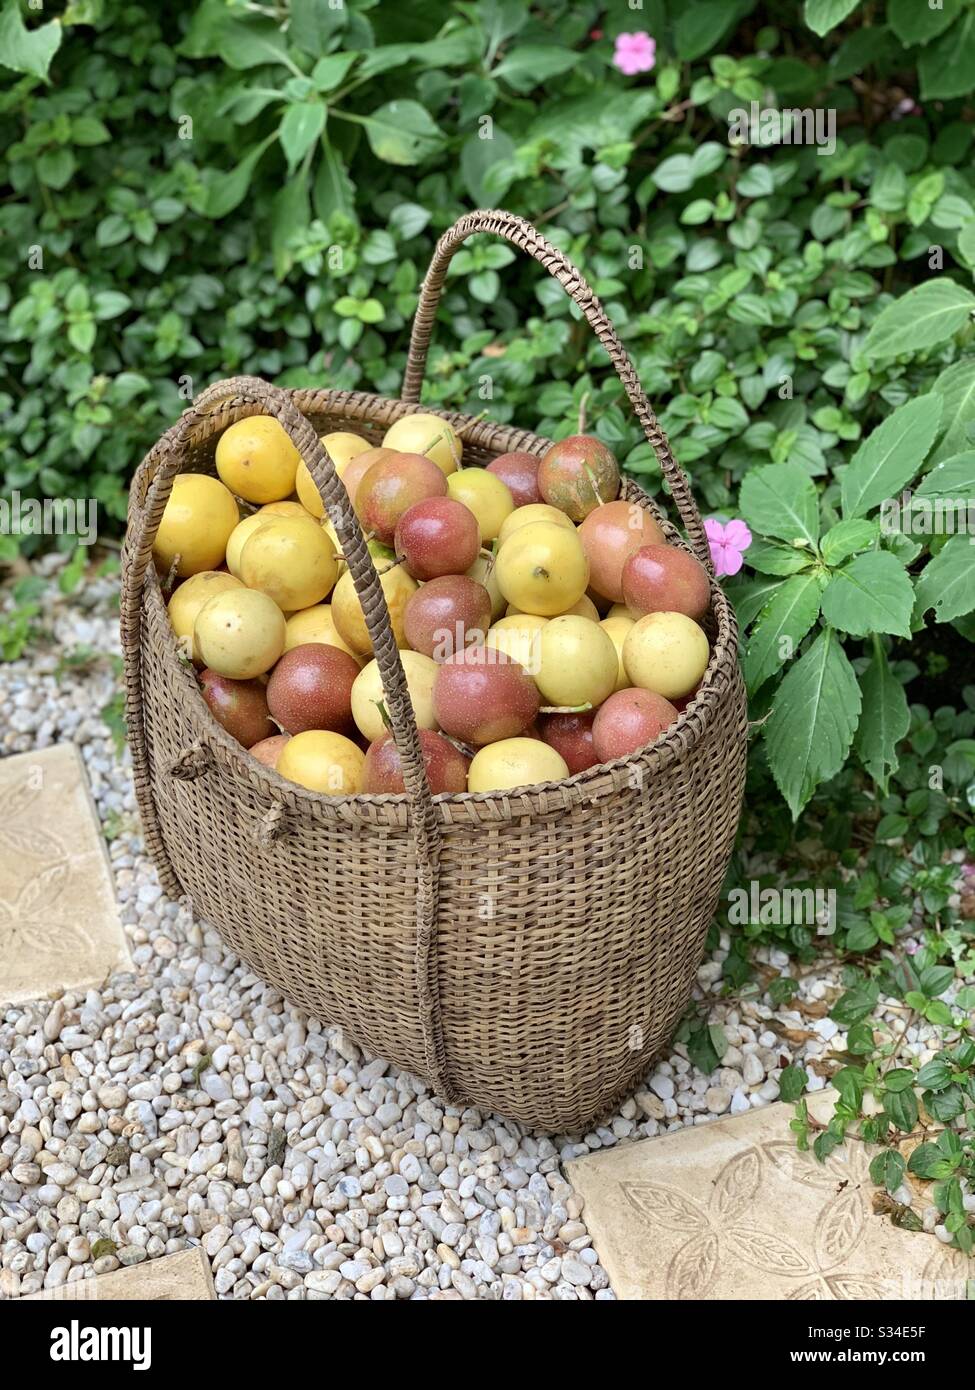 The beauty of harvesting passion fruits in different shades, neatly placed in a native handwoven  basket. Growing your own food is the best! Stock Photo